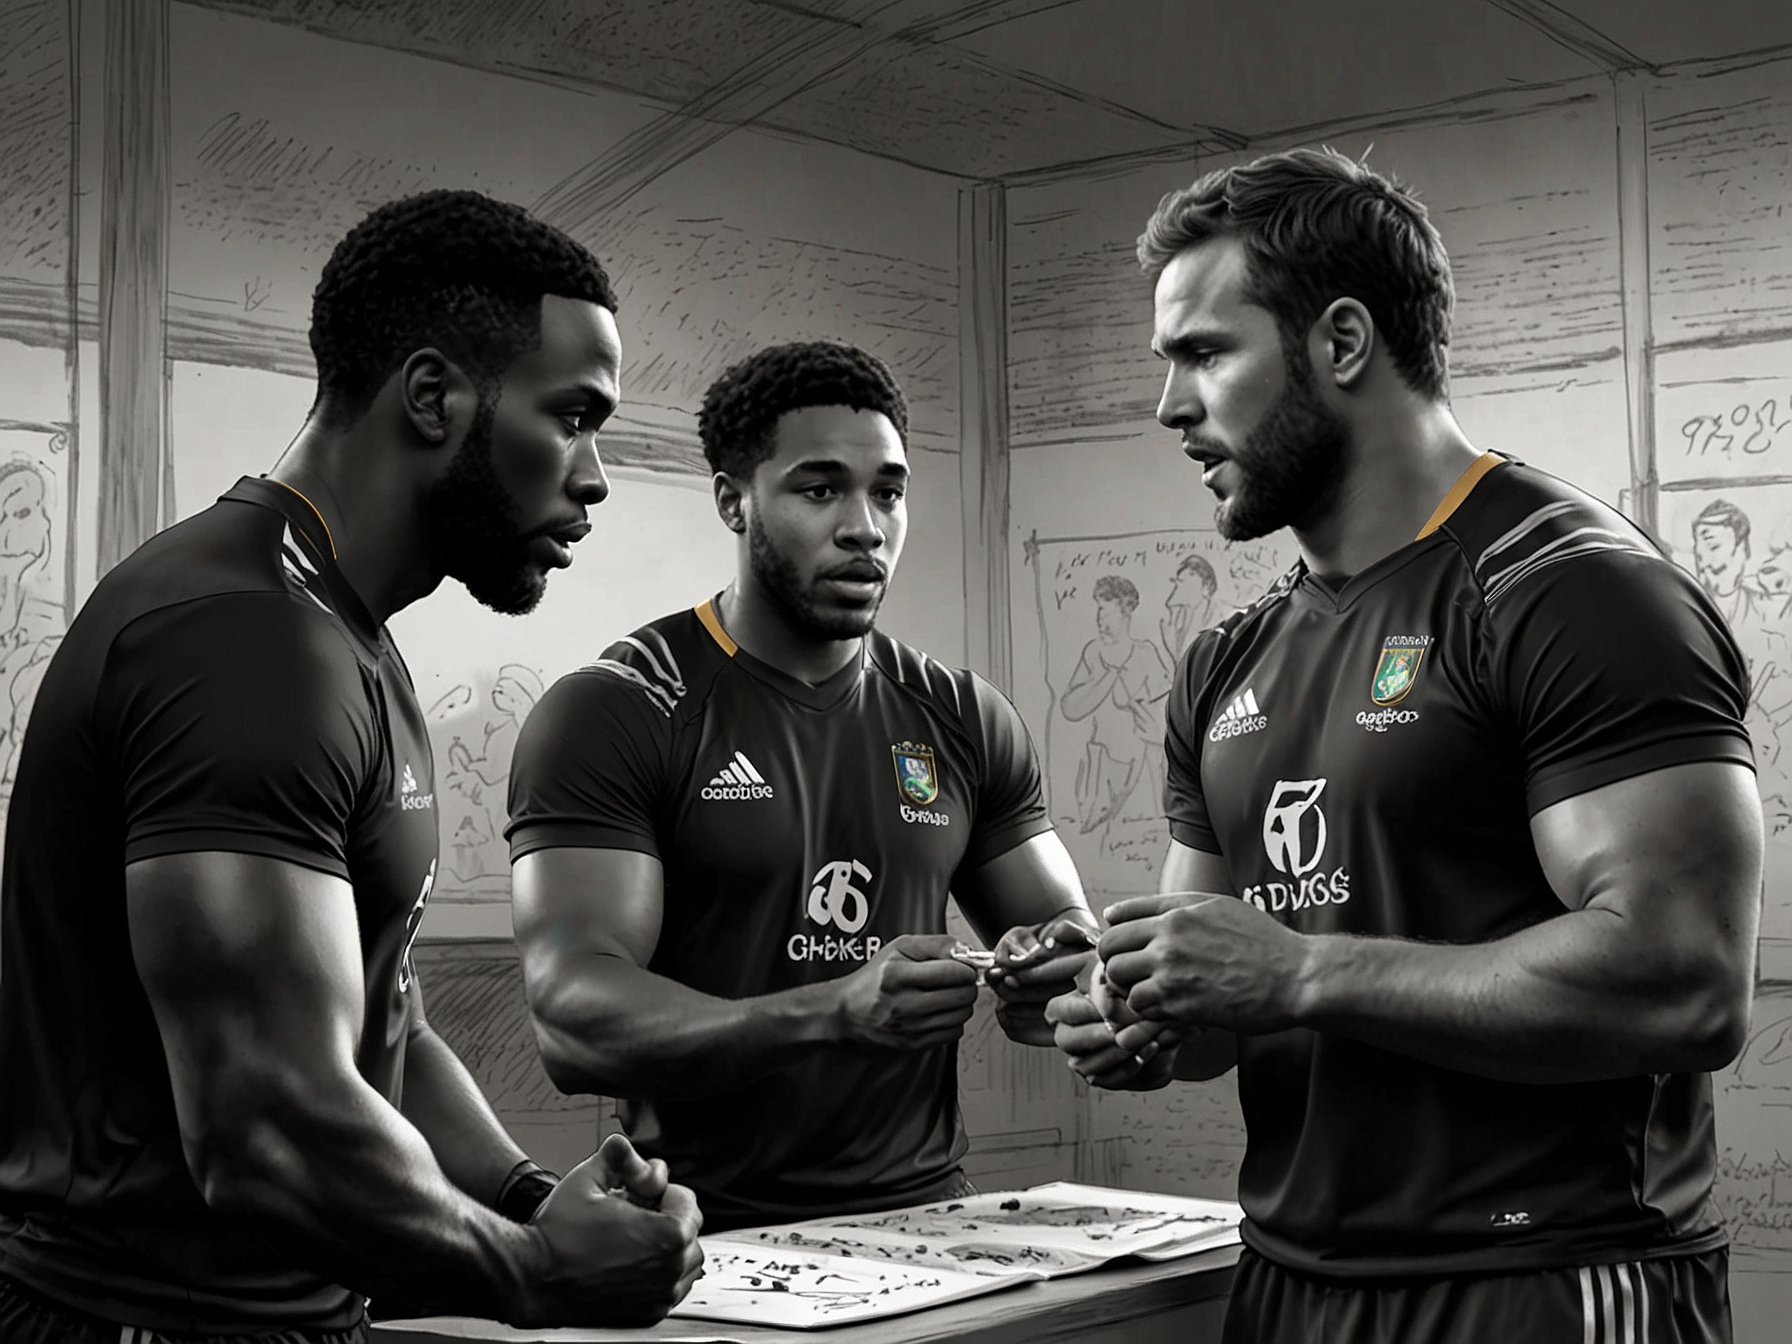 Key players like Siya Kolisi, Cheslin Kolbe, and Alun Wyn Jones preparing and strategizing during a practice session, reflecting the anticipation and preparations for the upcoming game.